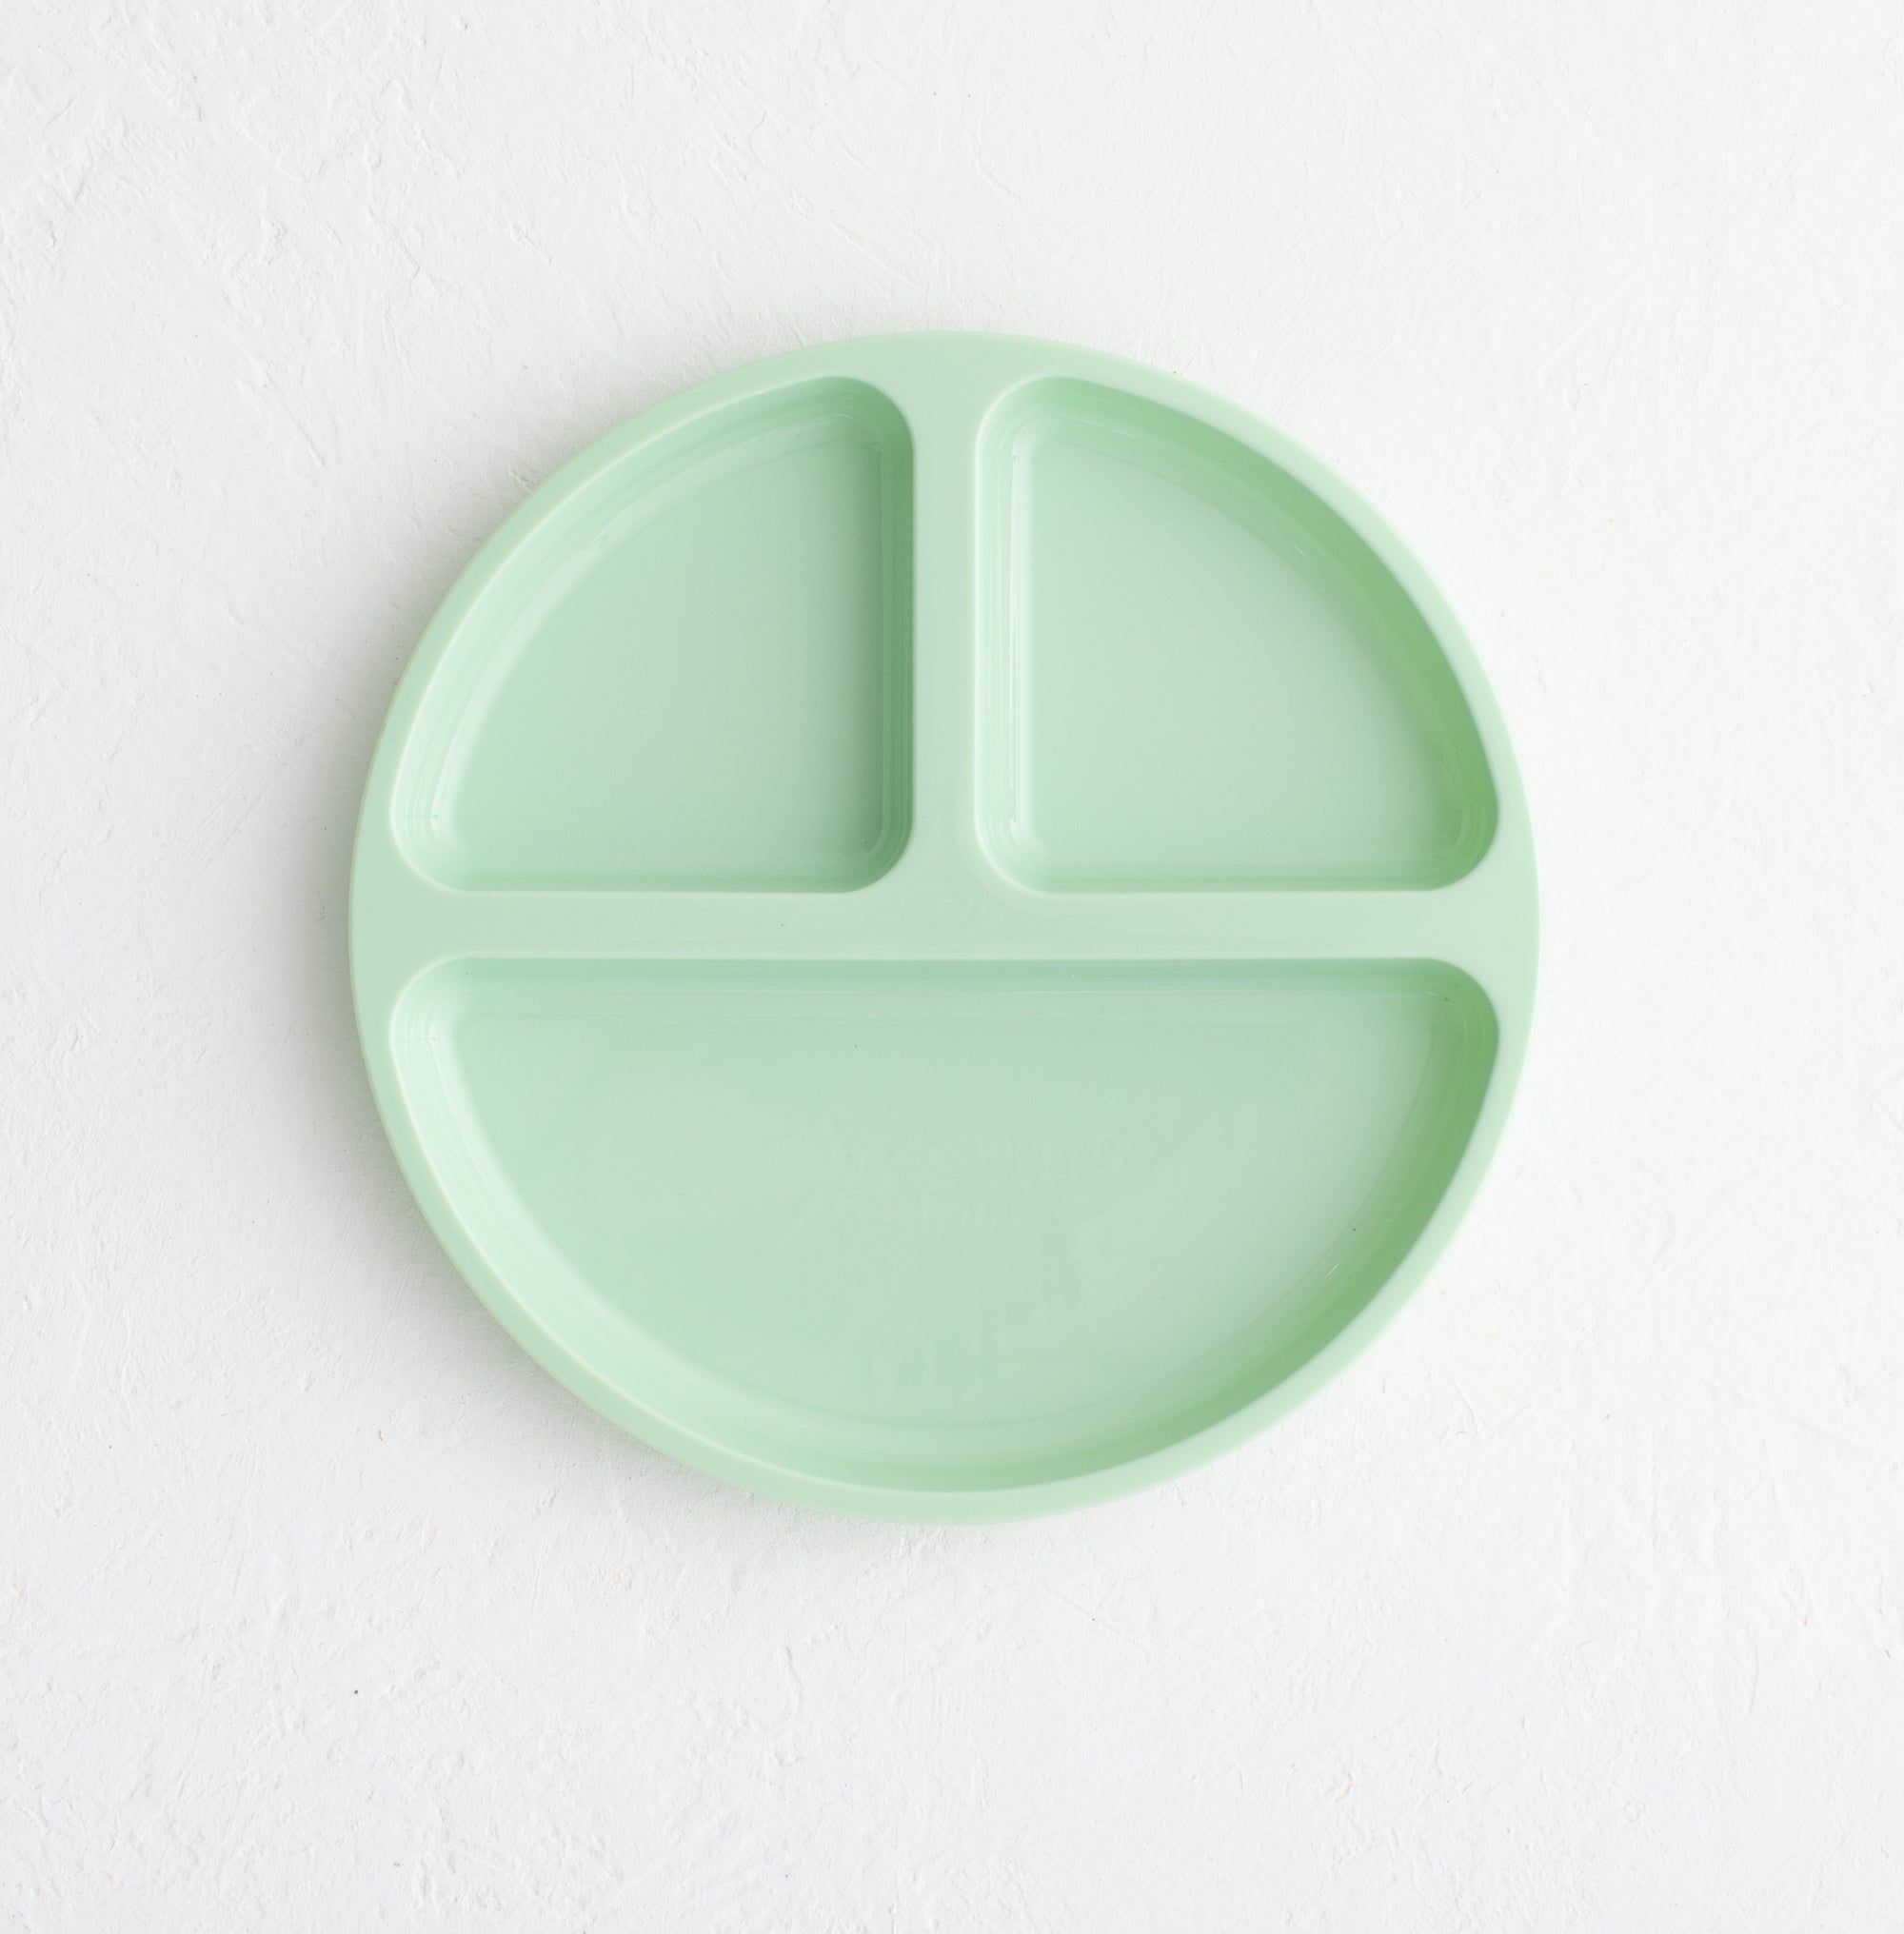 Recycled Plastic Divided Plate for Toddlers from Nestor Avenue